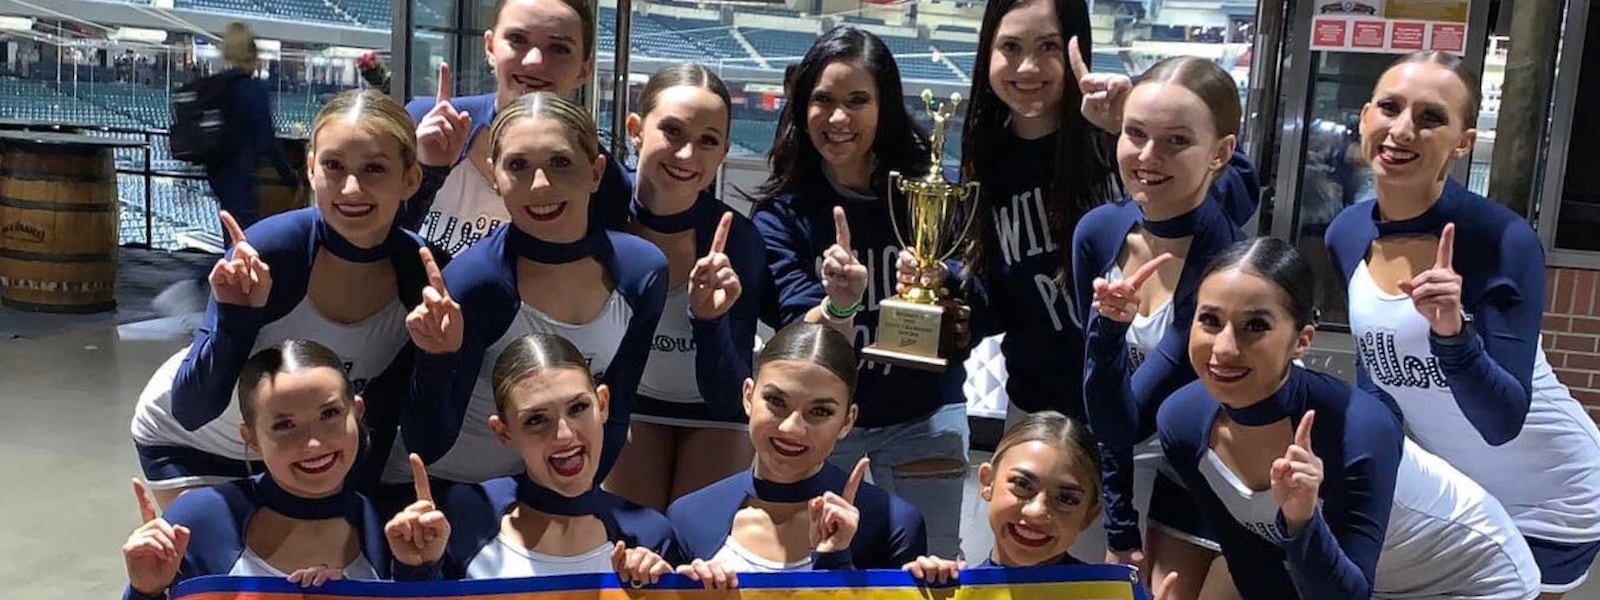 Willow Canyon's Spiritline poses with their trophy and first place banner at the state championships.